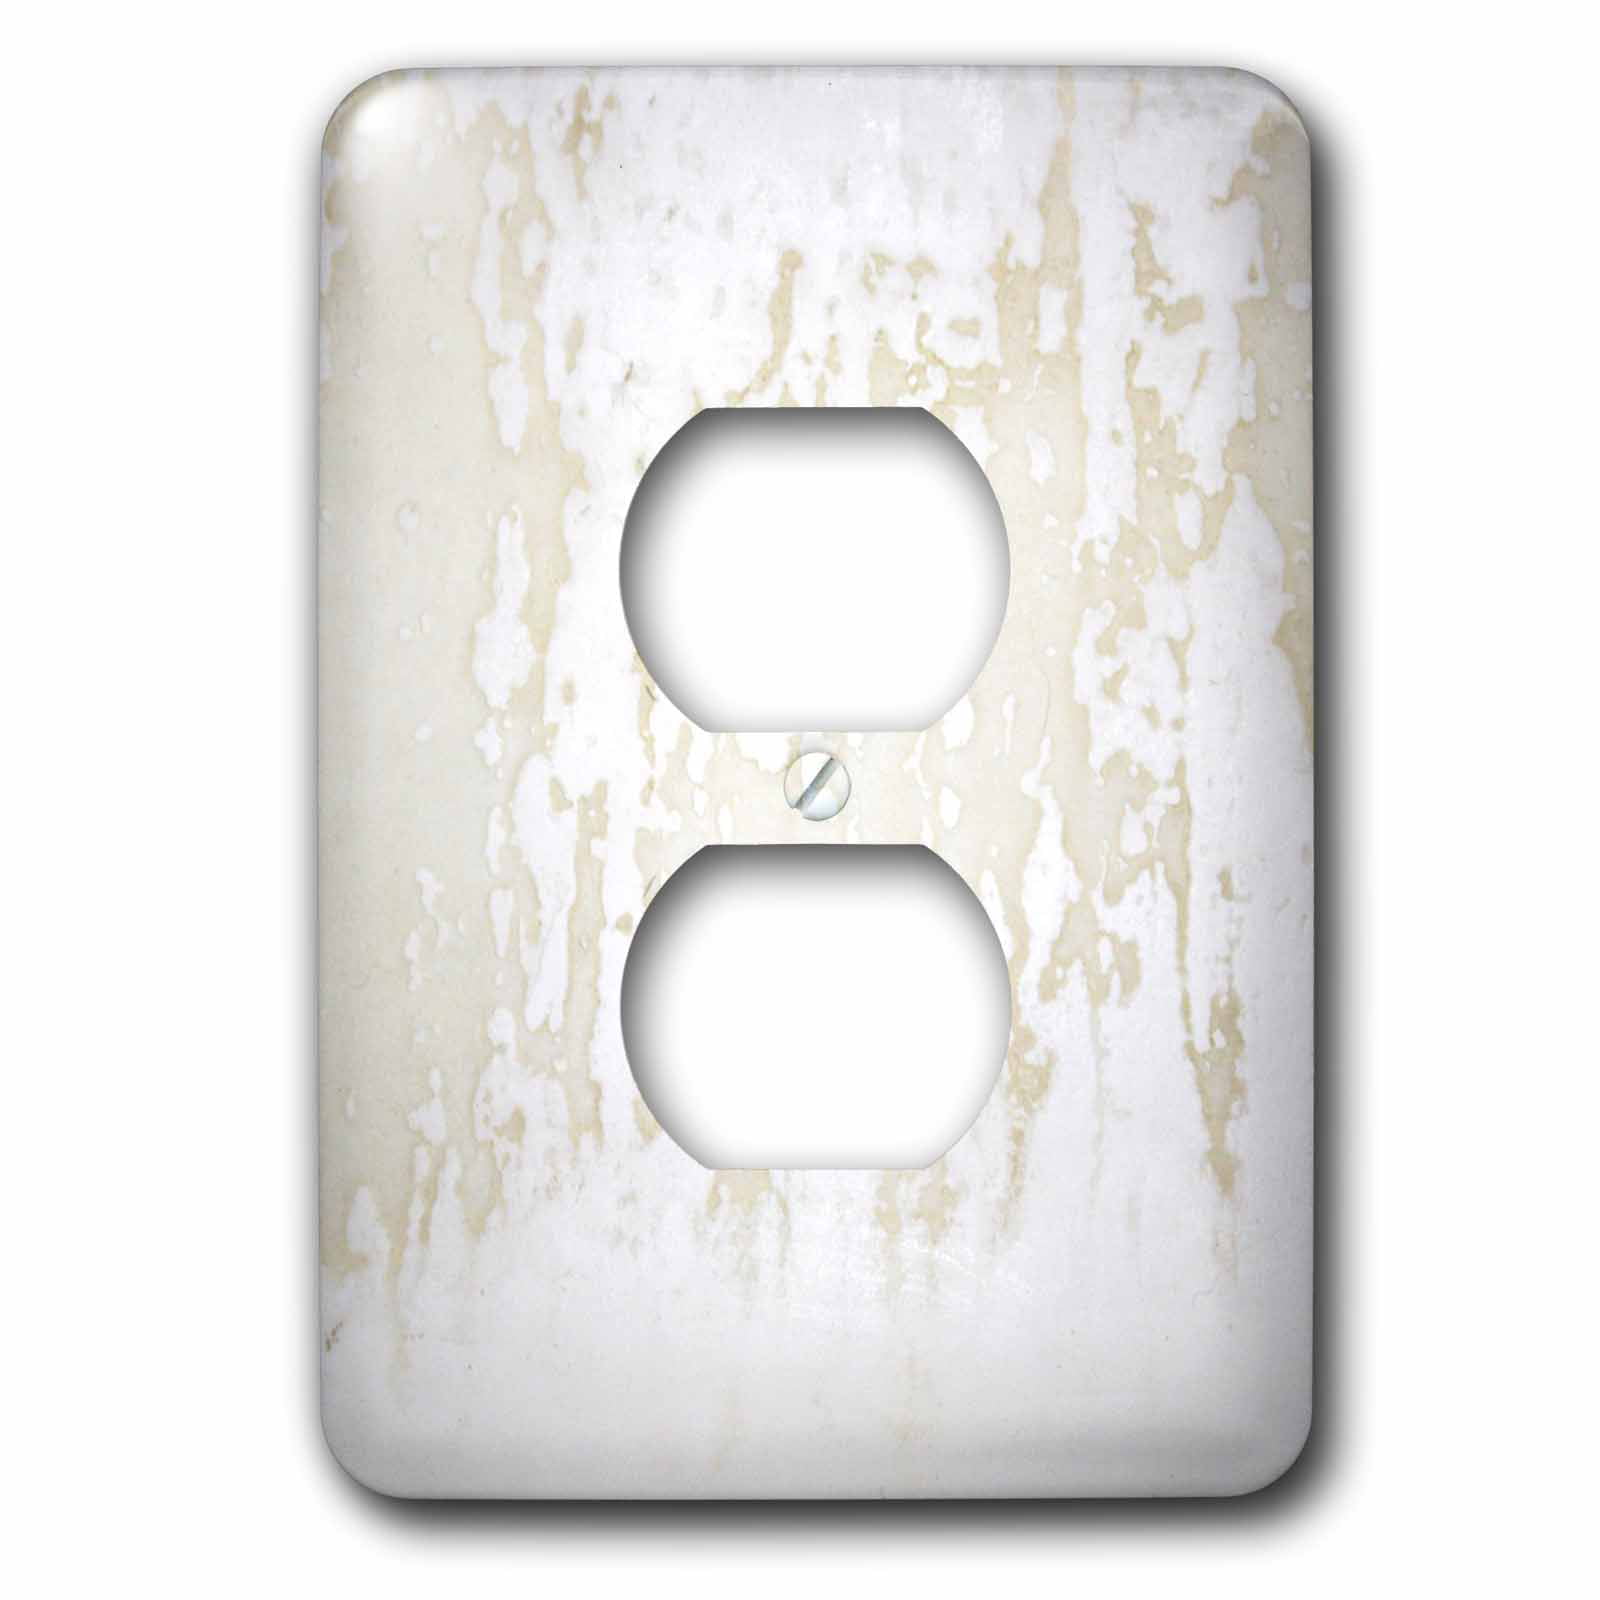 3dRose lsp_15767_6 White Pomeranian Puppy Outlet Cover 